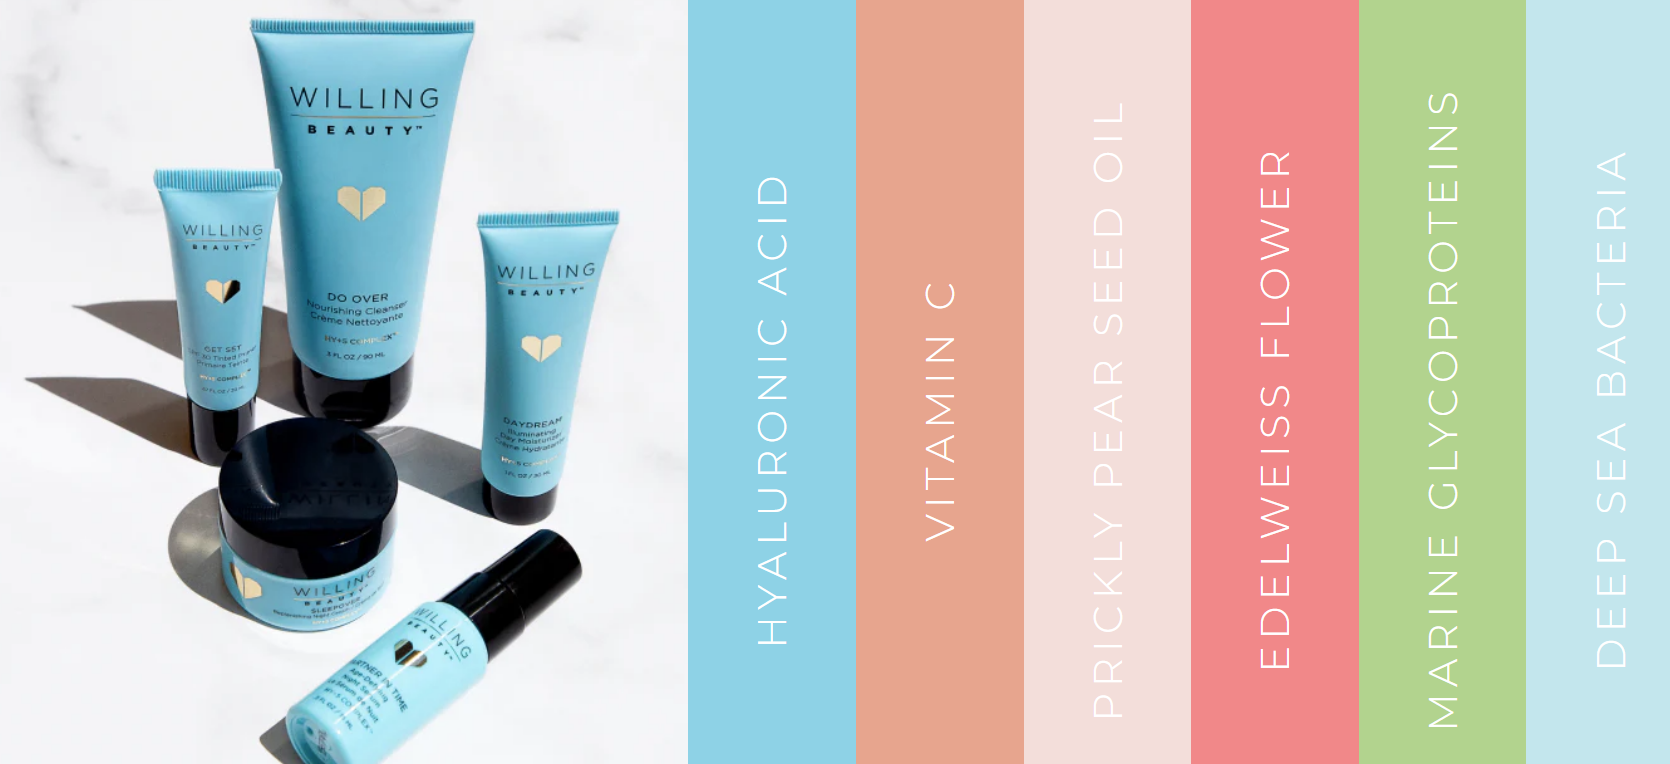 Willing Beauty set - skincare - Healthy Living - TIOLI Moments